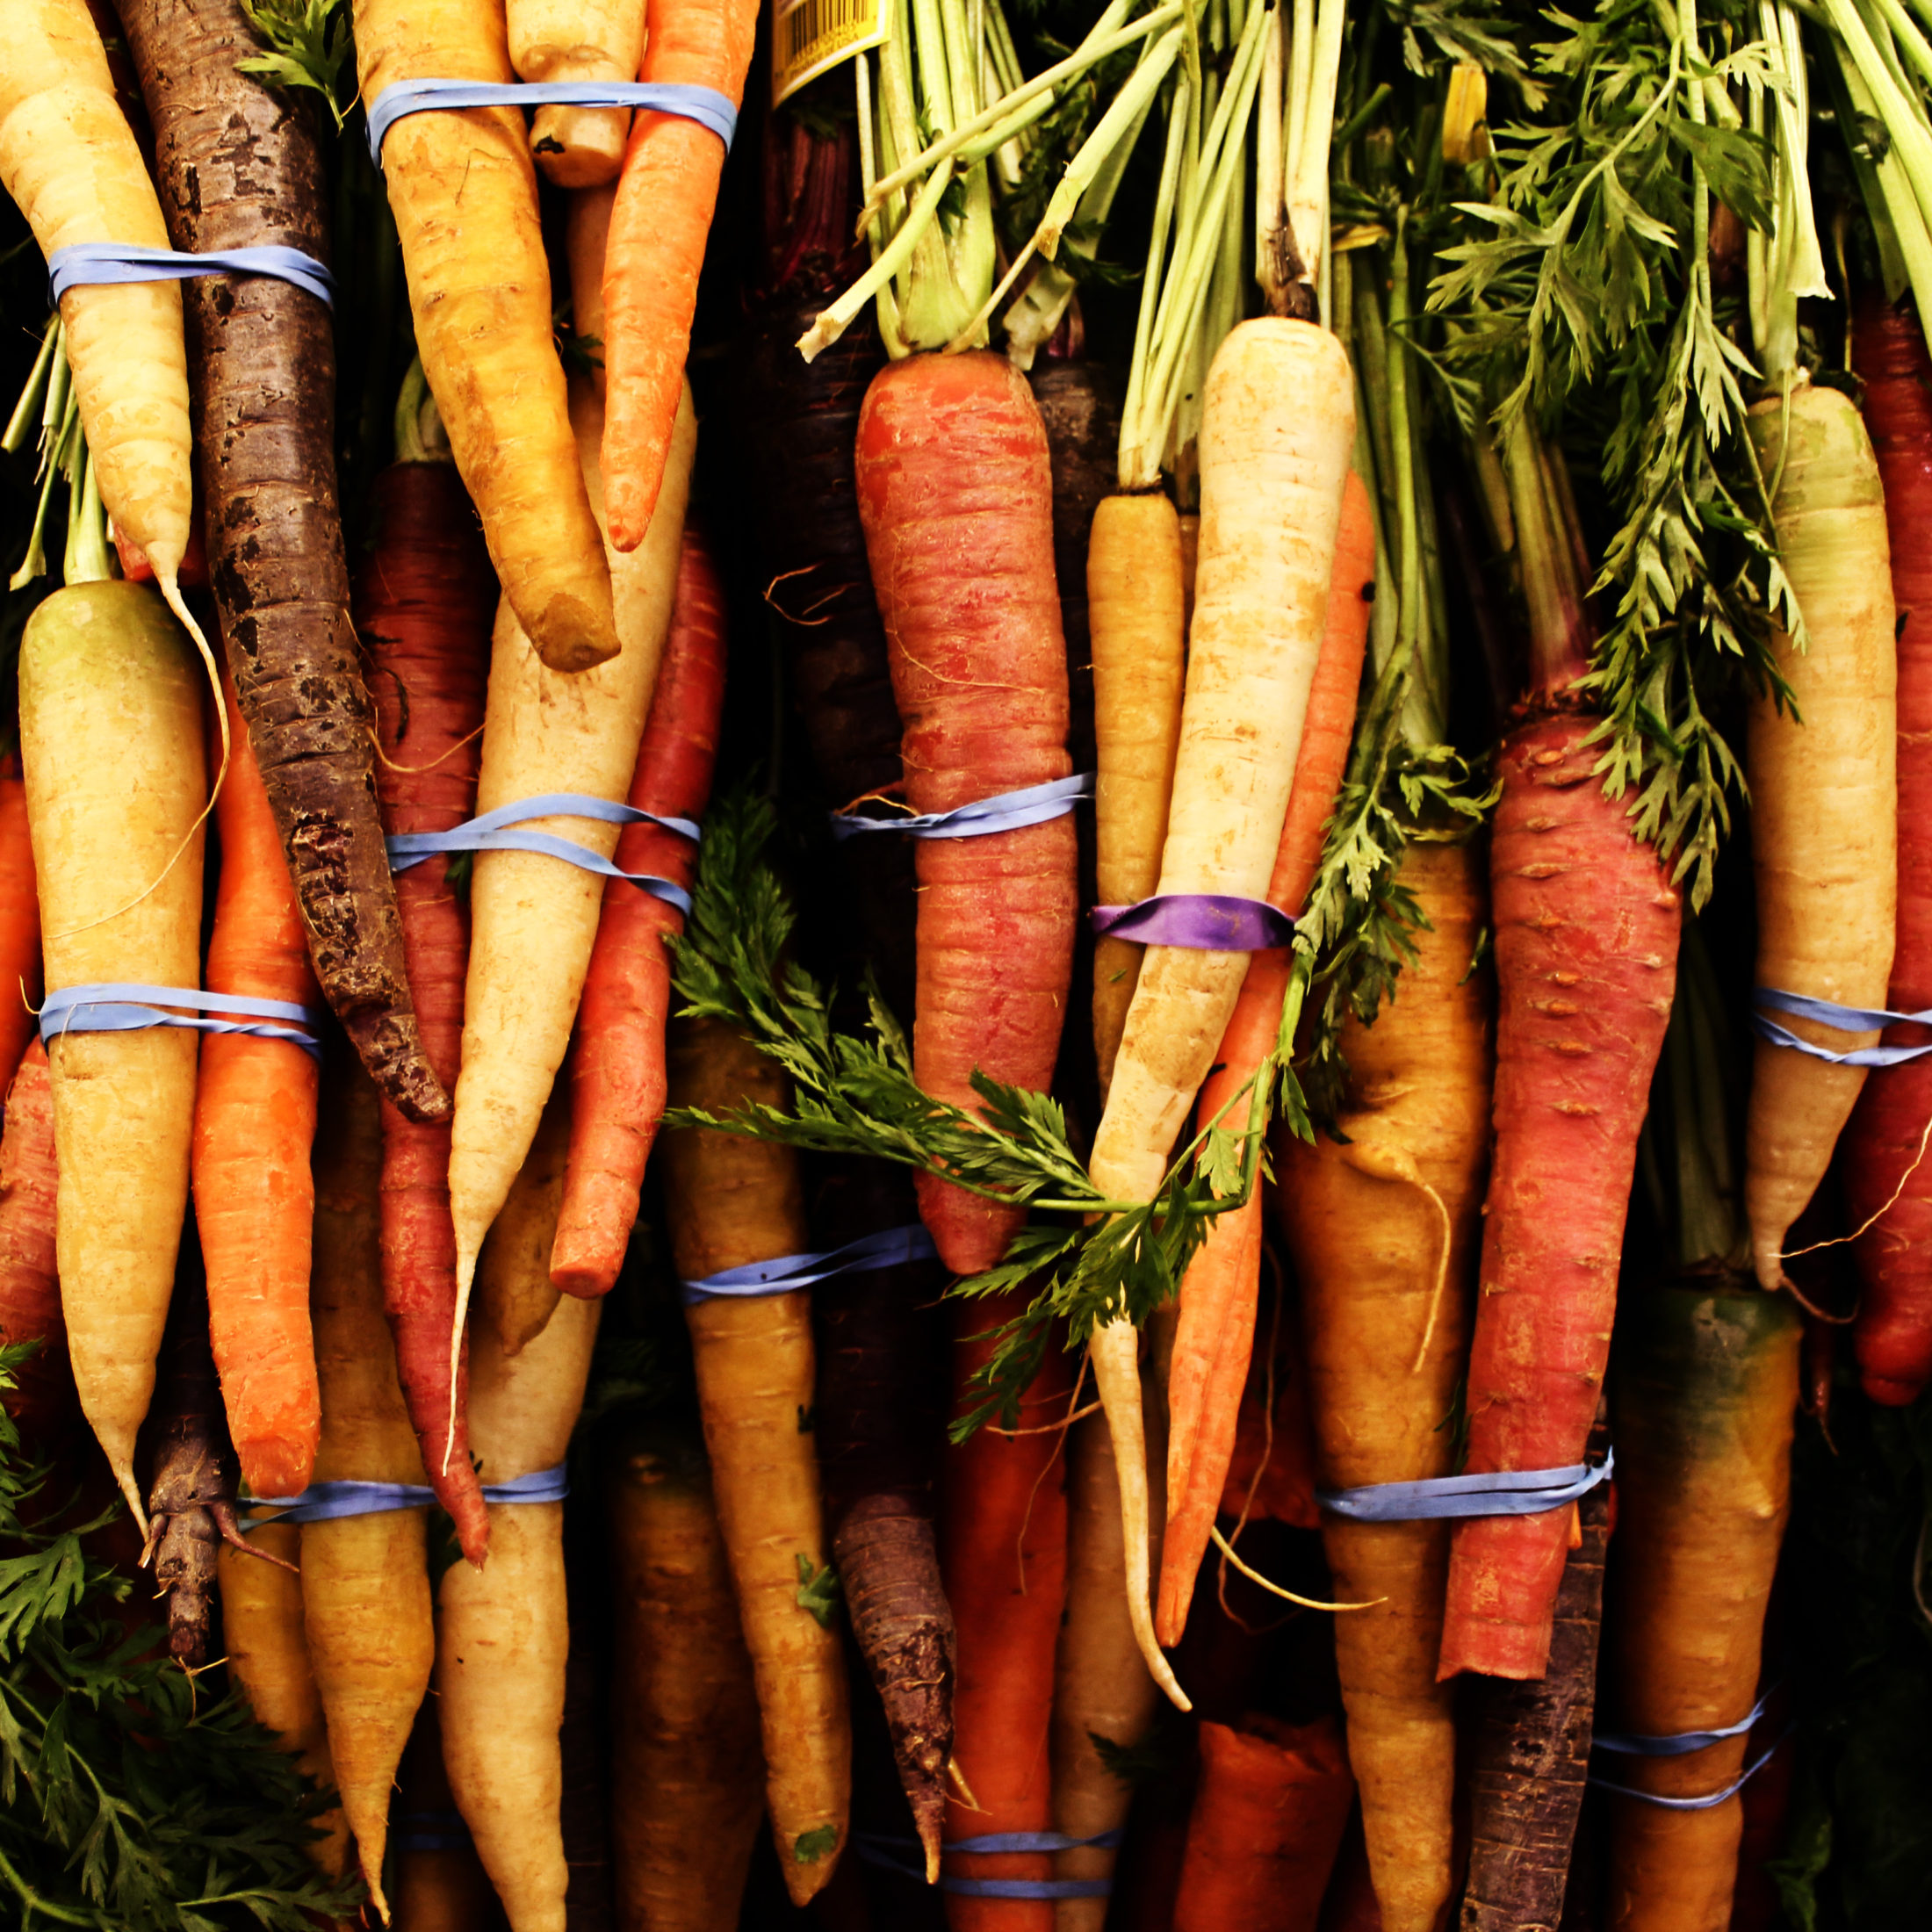 Fresh carrots with green carrot tops